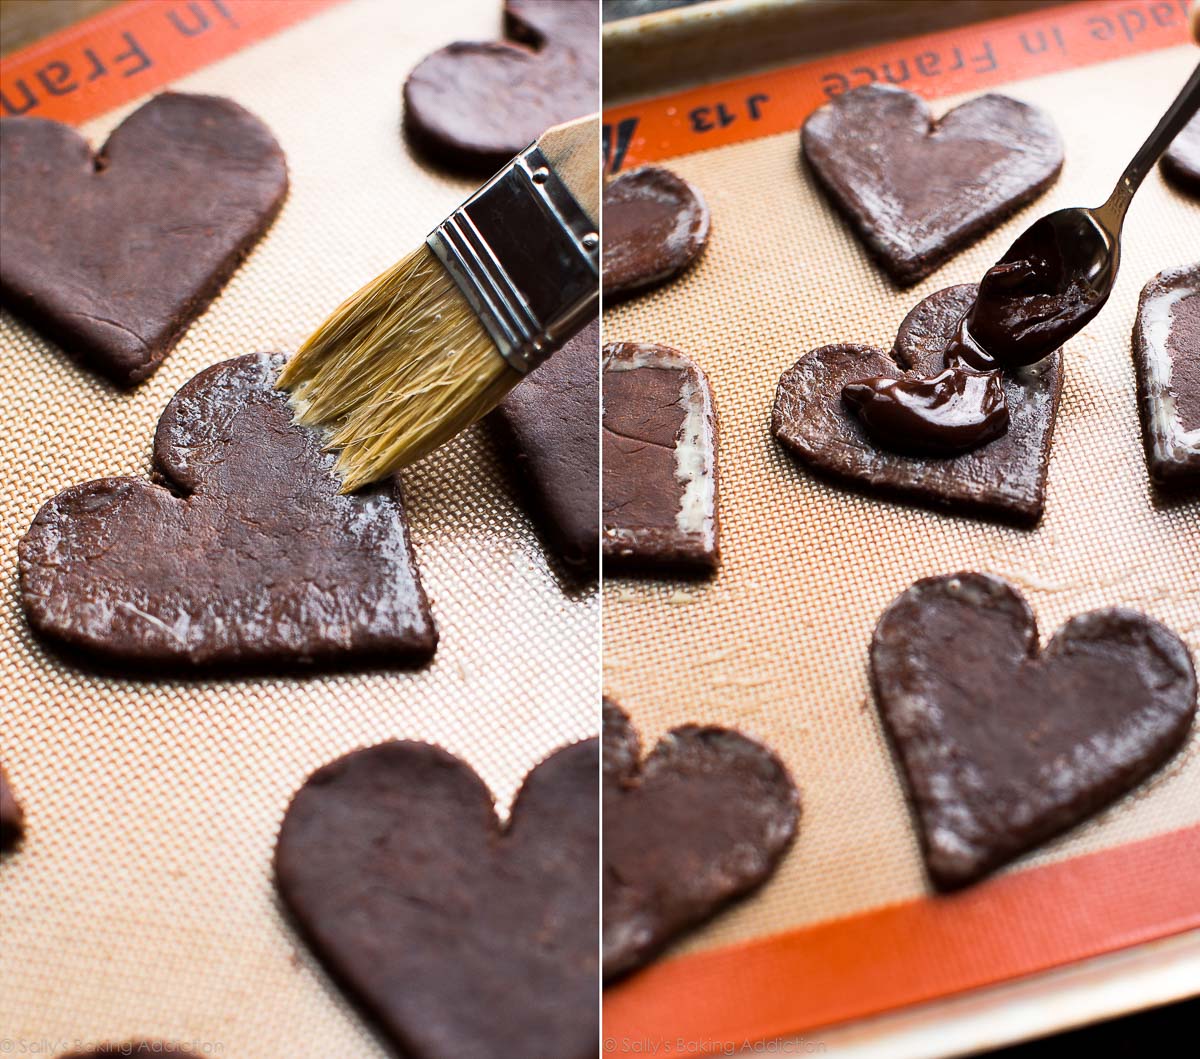 2 images of brushing heart pie dough cut outs with egg wash and spooning chocolate ganache filling onto the pie crust